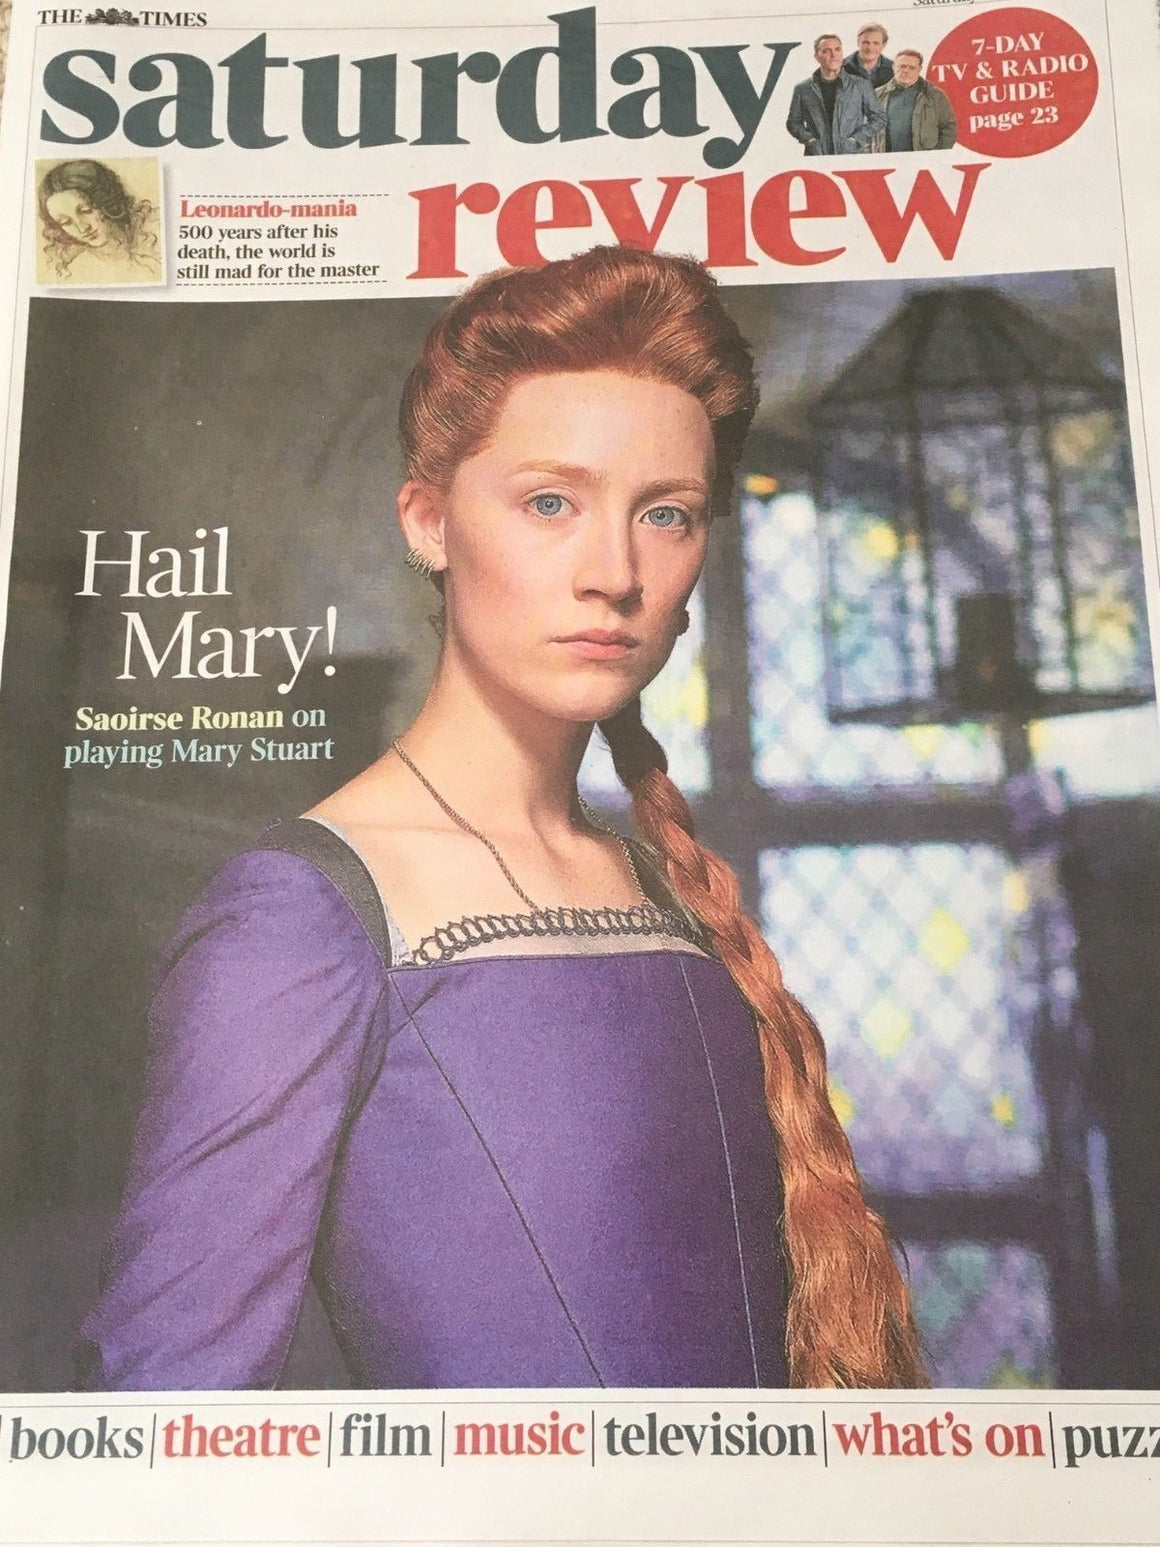 UK TIMES REVIEW JAN 2019: Saoirse Ronan Interview (Mary Queen of Scots)